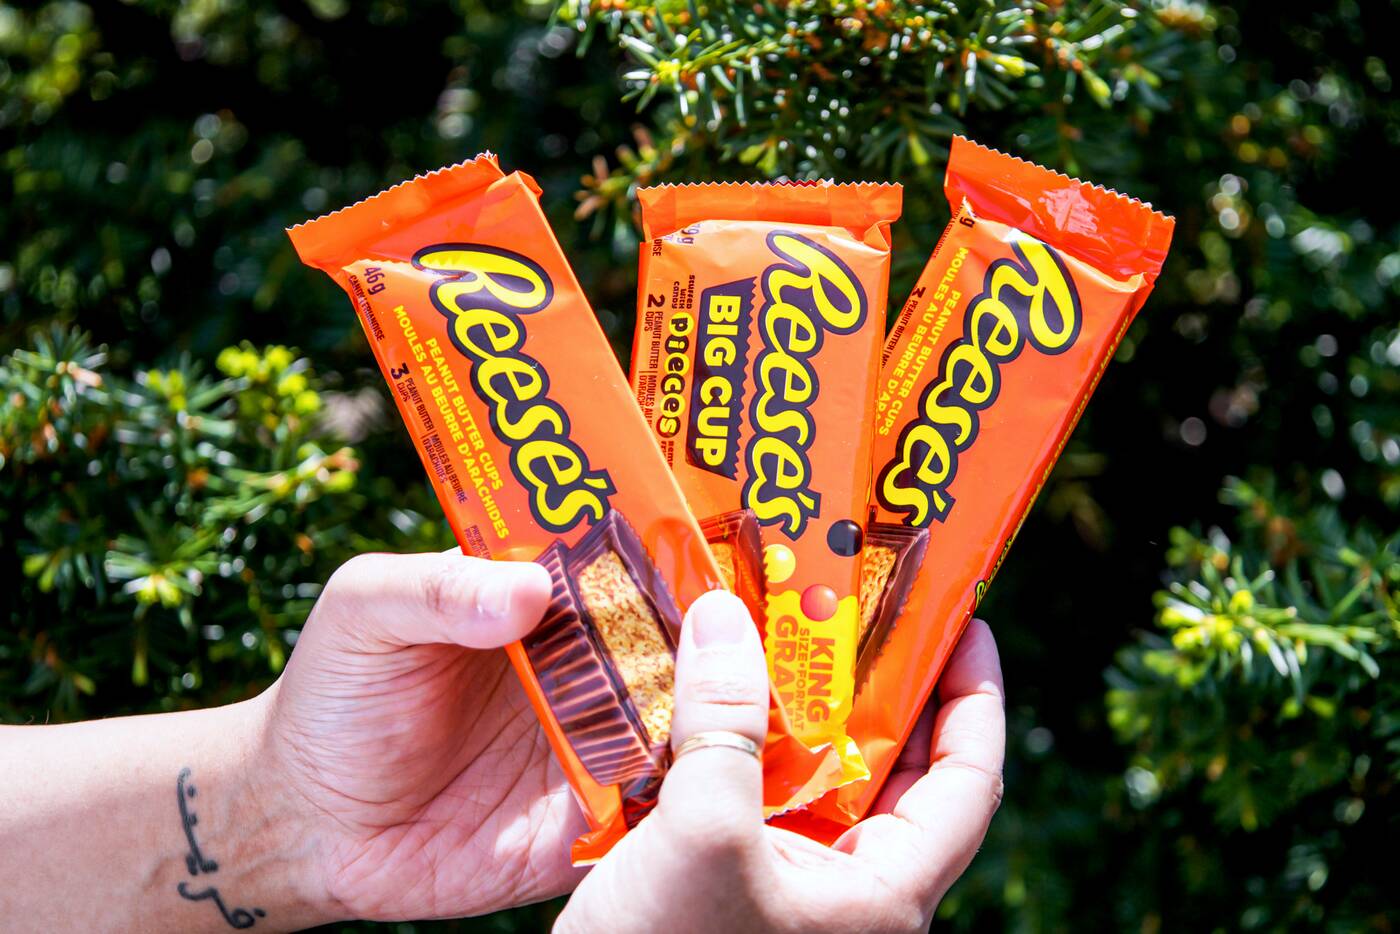 reeses pieces